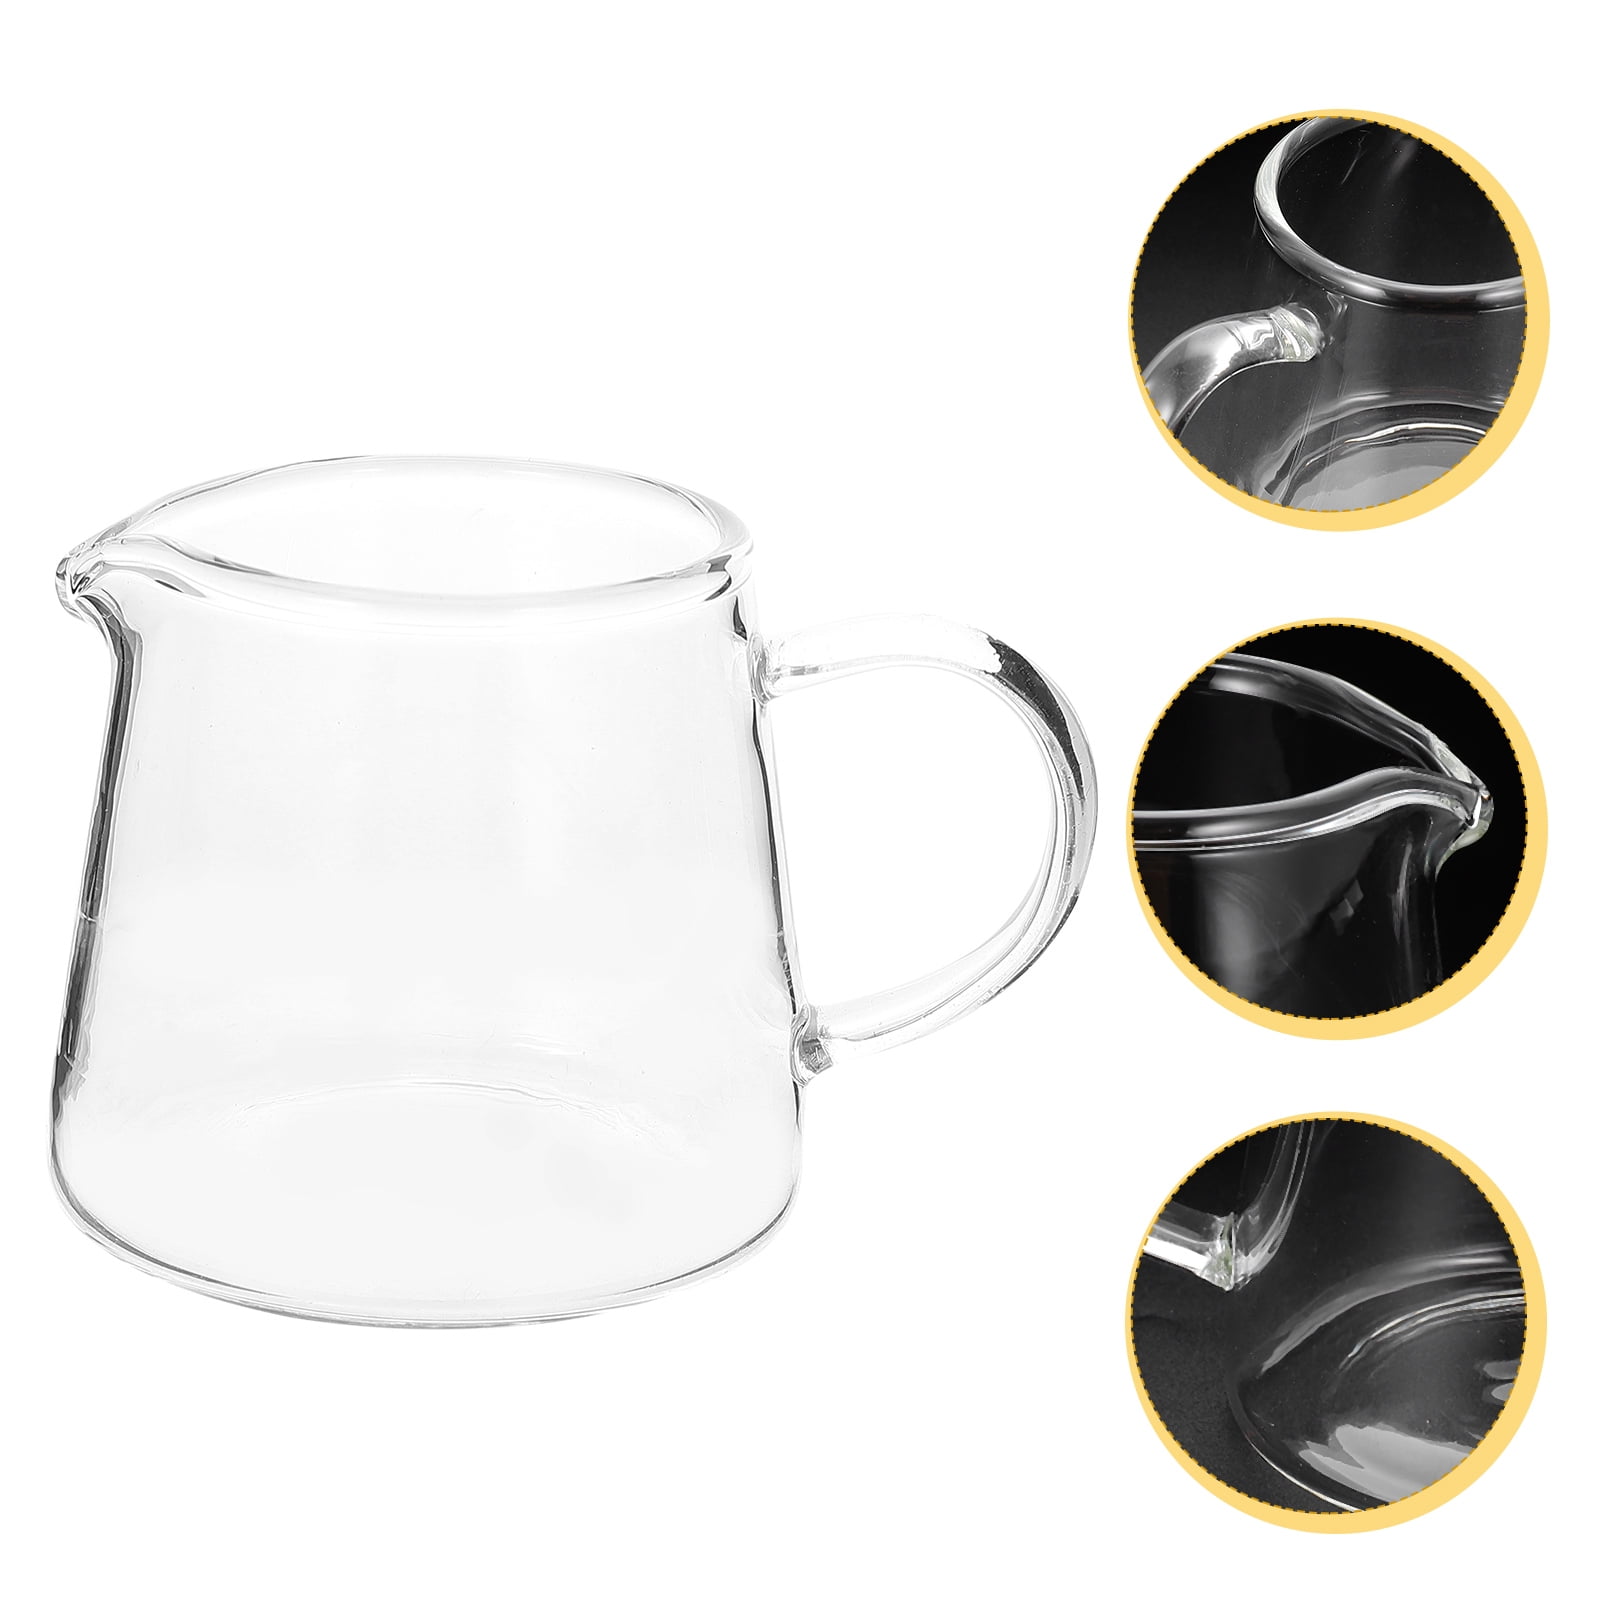 Liter Amber Glass Saucepan Milk frother cup Milk frothing jug